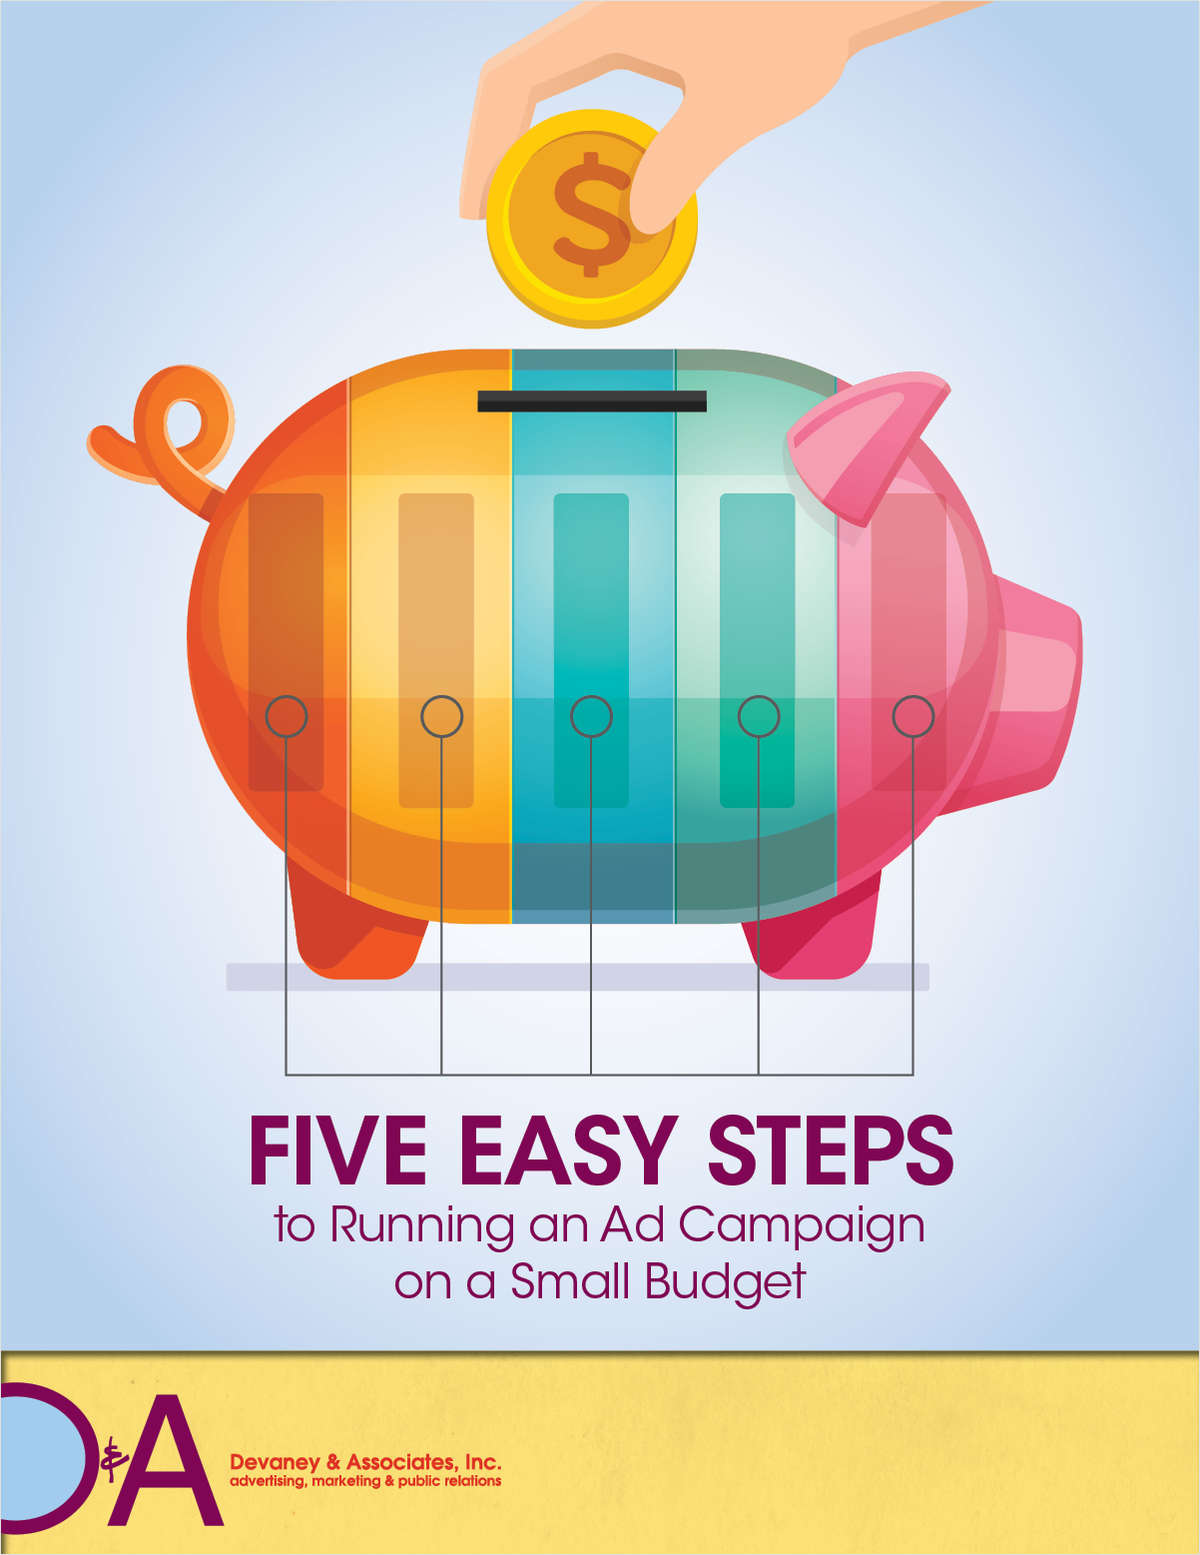 5 Easy Steps to Running an Ad Campaign on a Small Budget